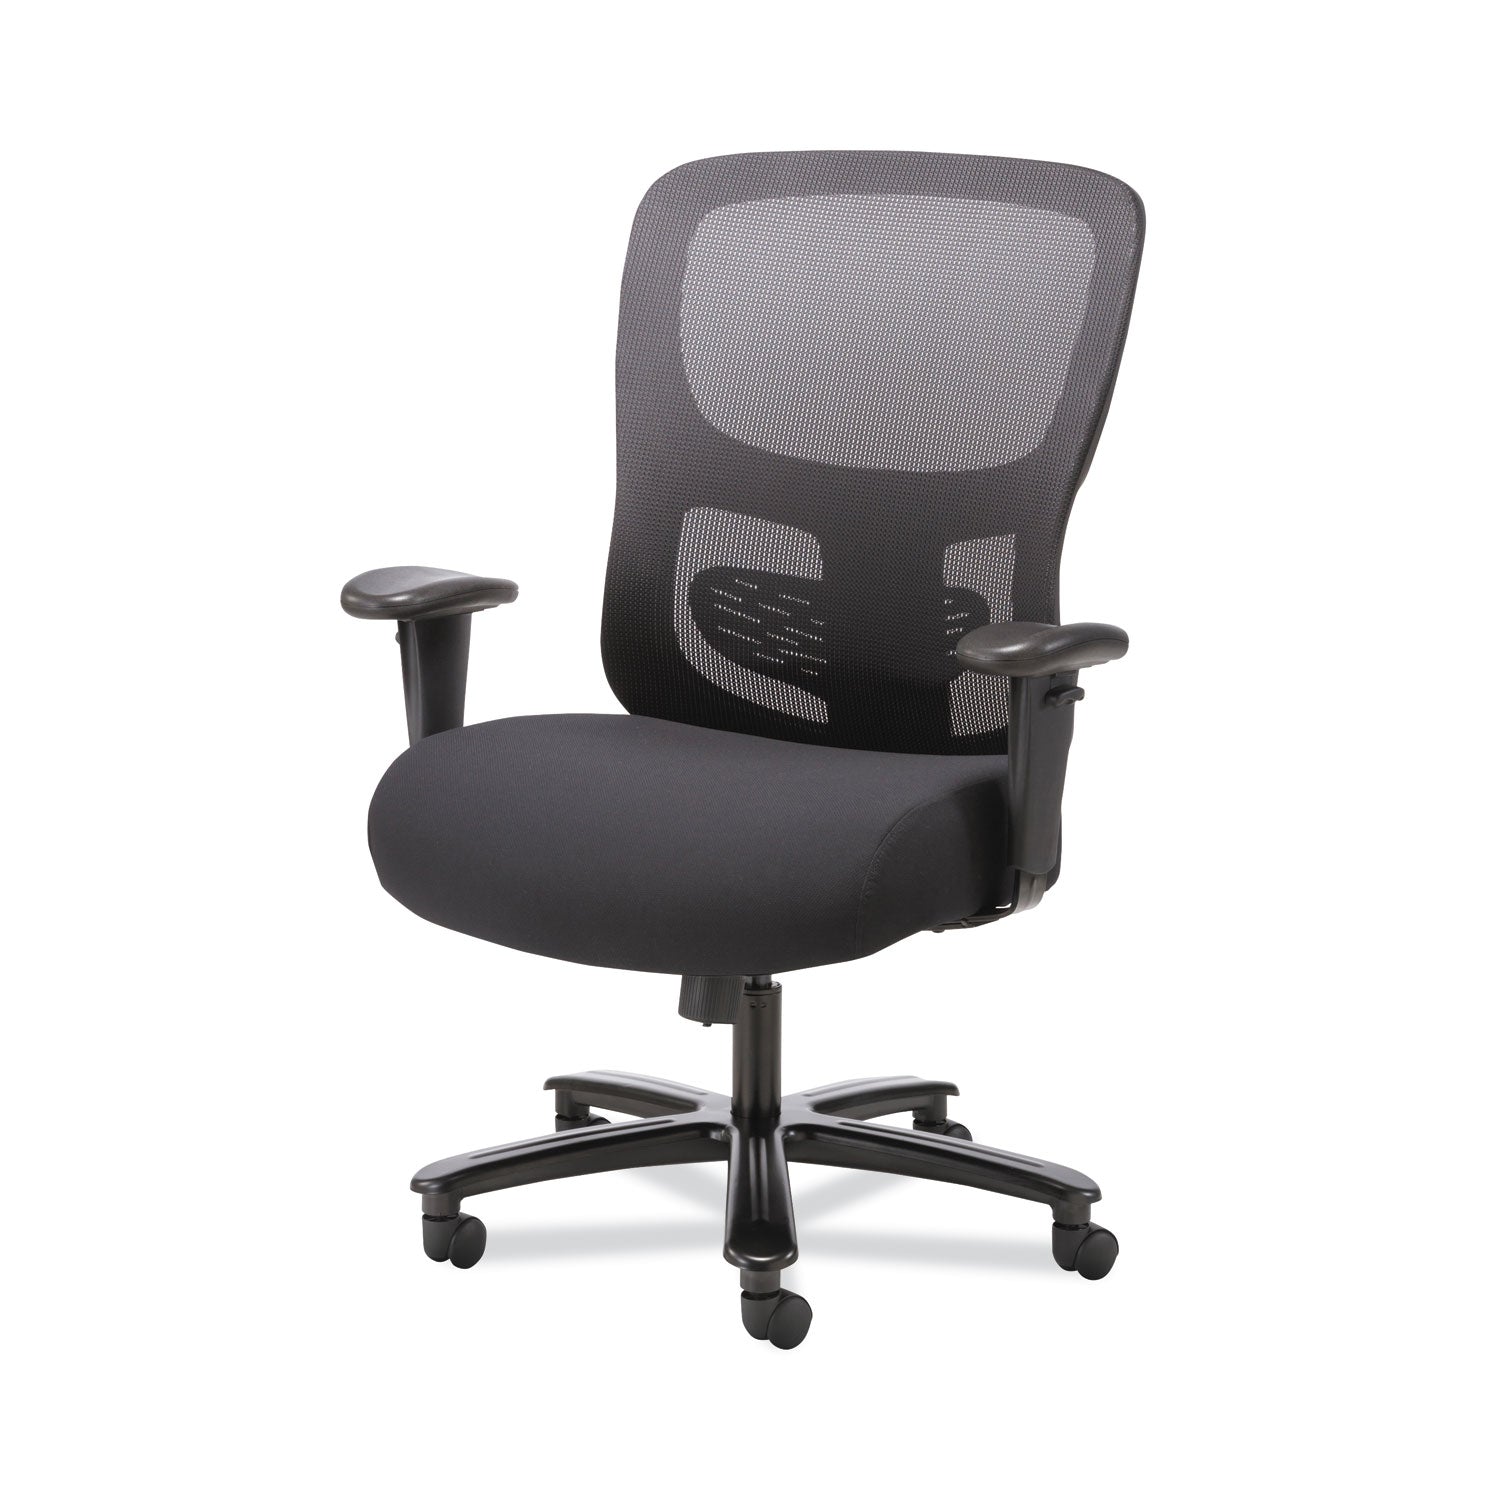 1-fourty-one-big-tall-mesh-task-chair-supports-up-to-400-lb-192-to-2285-seat-height-black_bsxvst141 - 2